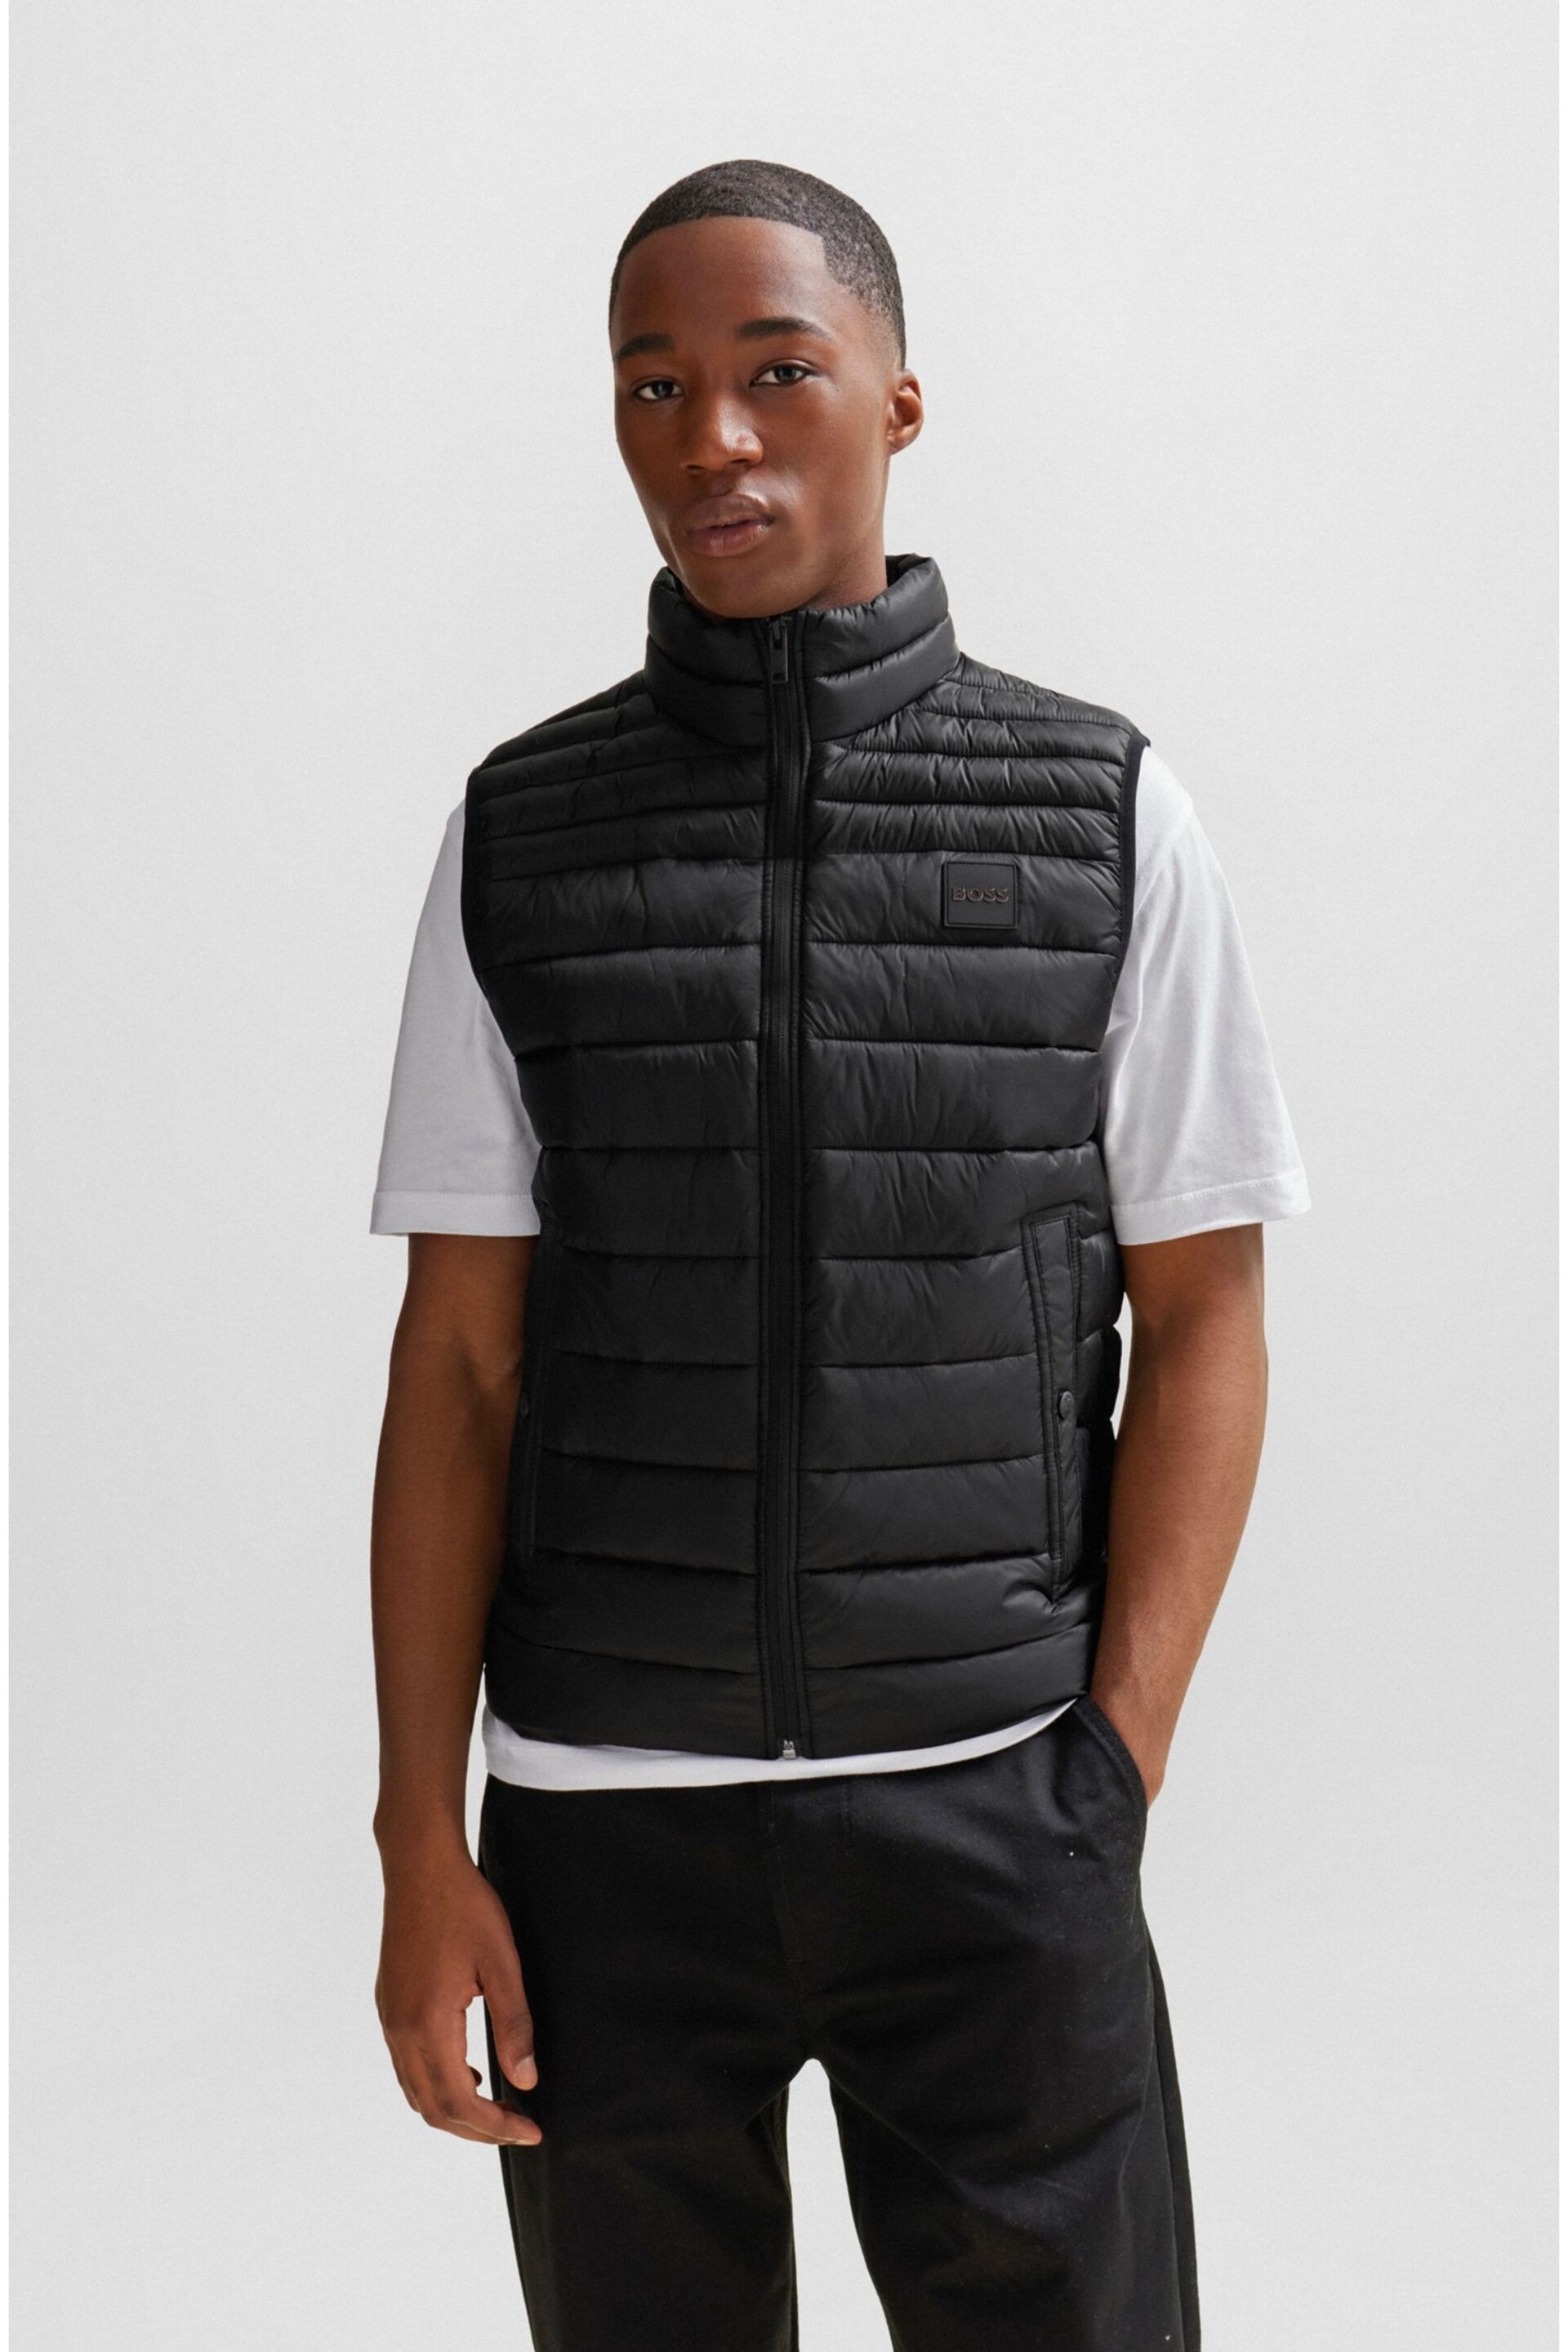 BOSS Black Lightweight Padded Gilet With Water-Repellent Finish - Image 1 of 6